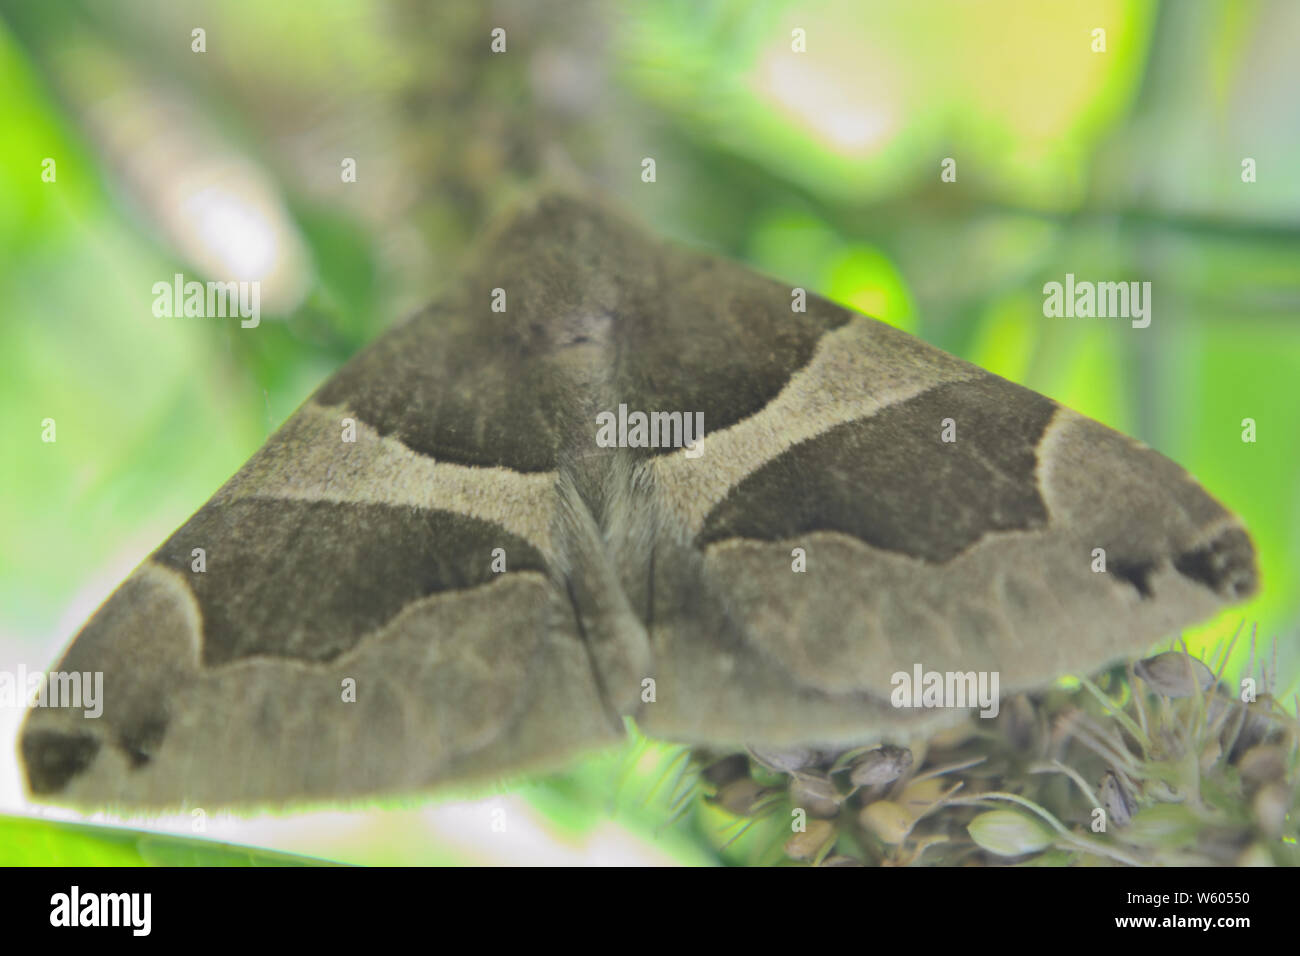 Lepidoptera with two shades gray in grass, butterfly or moth Stock Photo